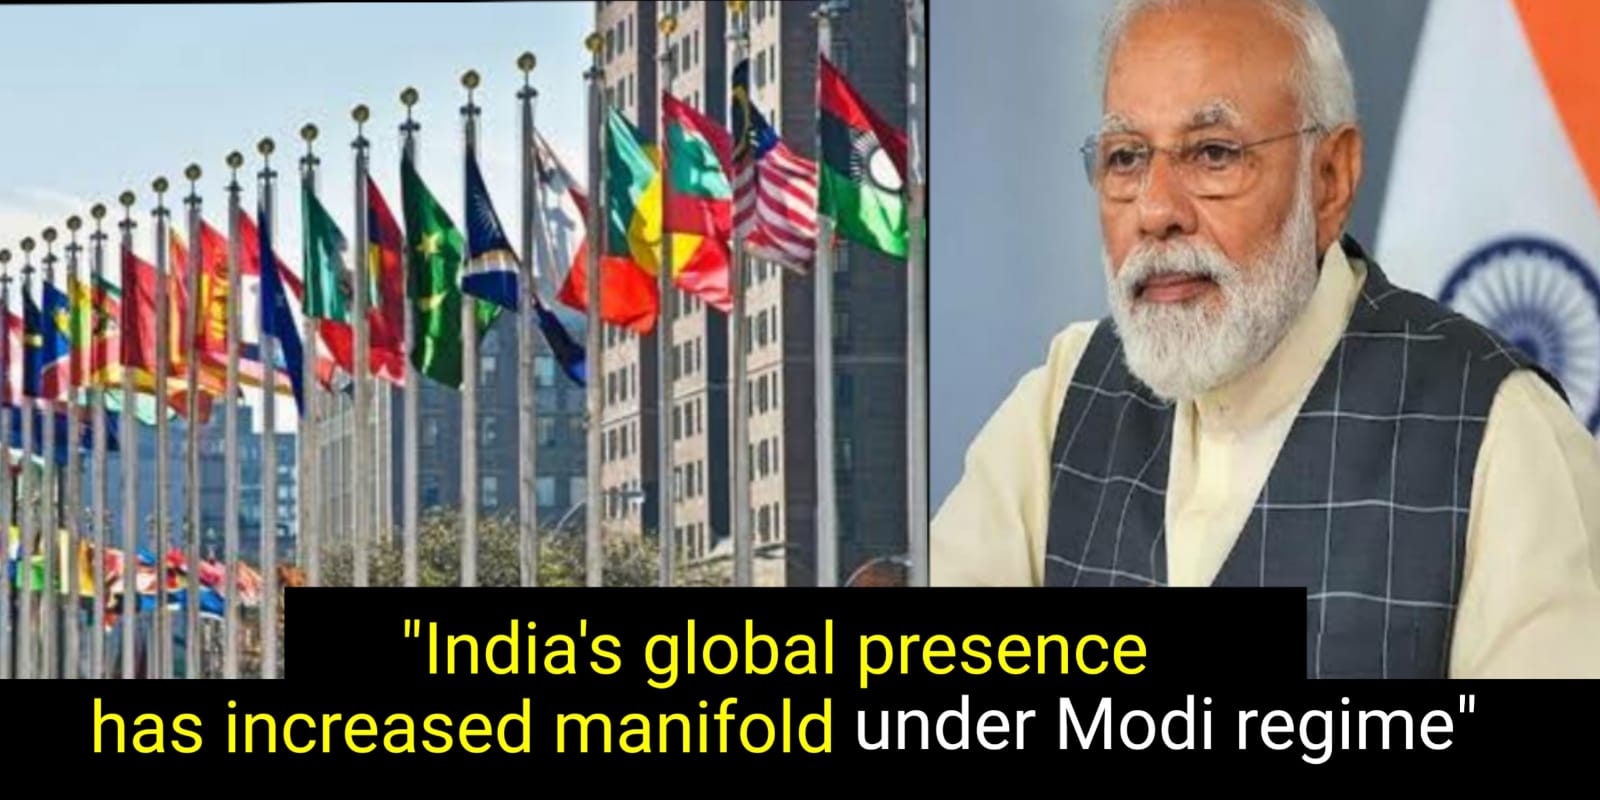 Narendra Modi becomes the first Indian Prime Minister to chair UNSC meeting, proud moment for us